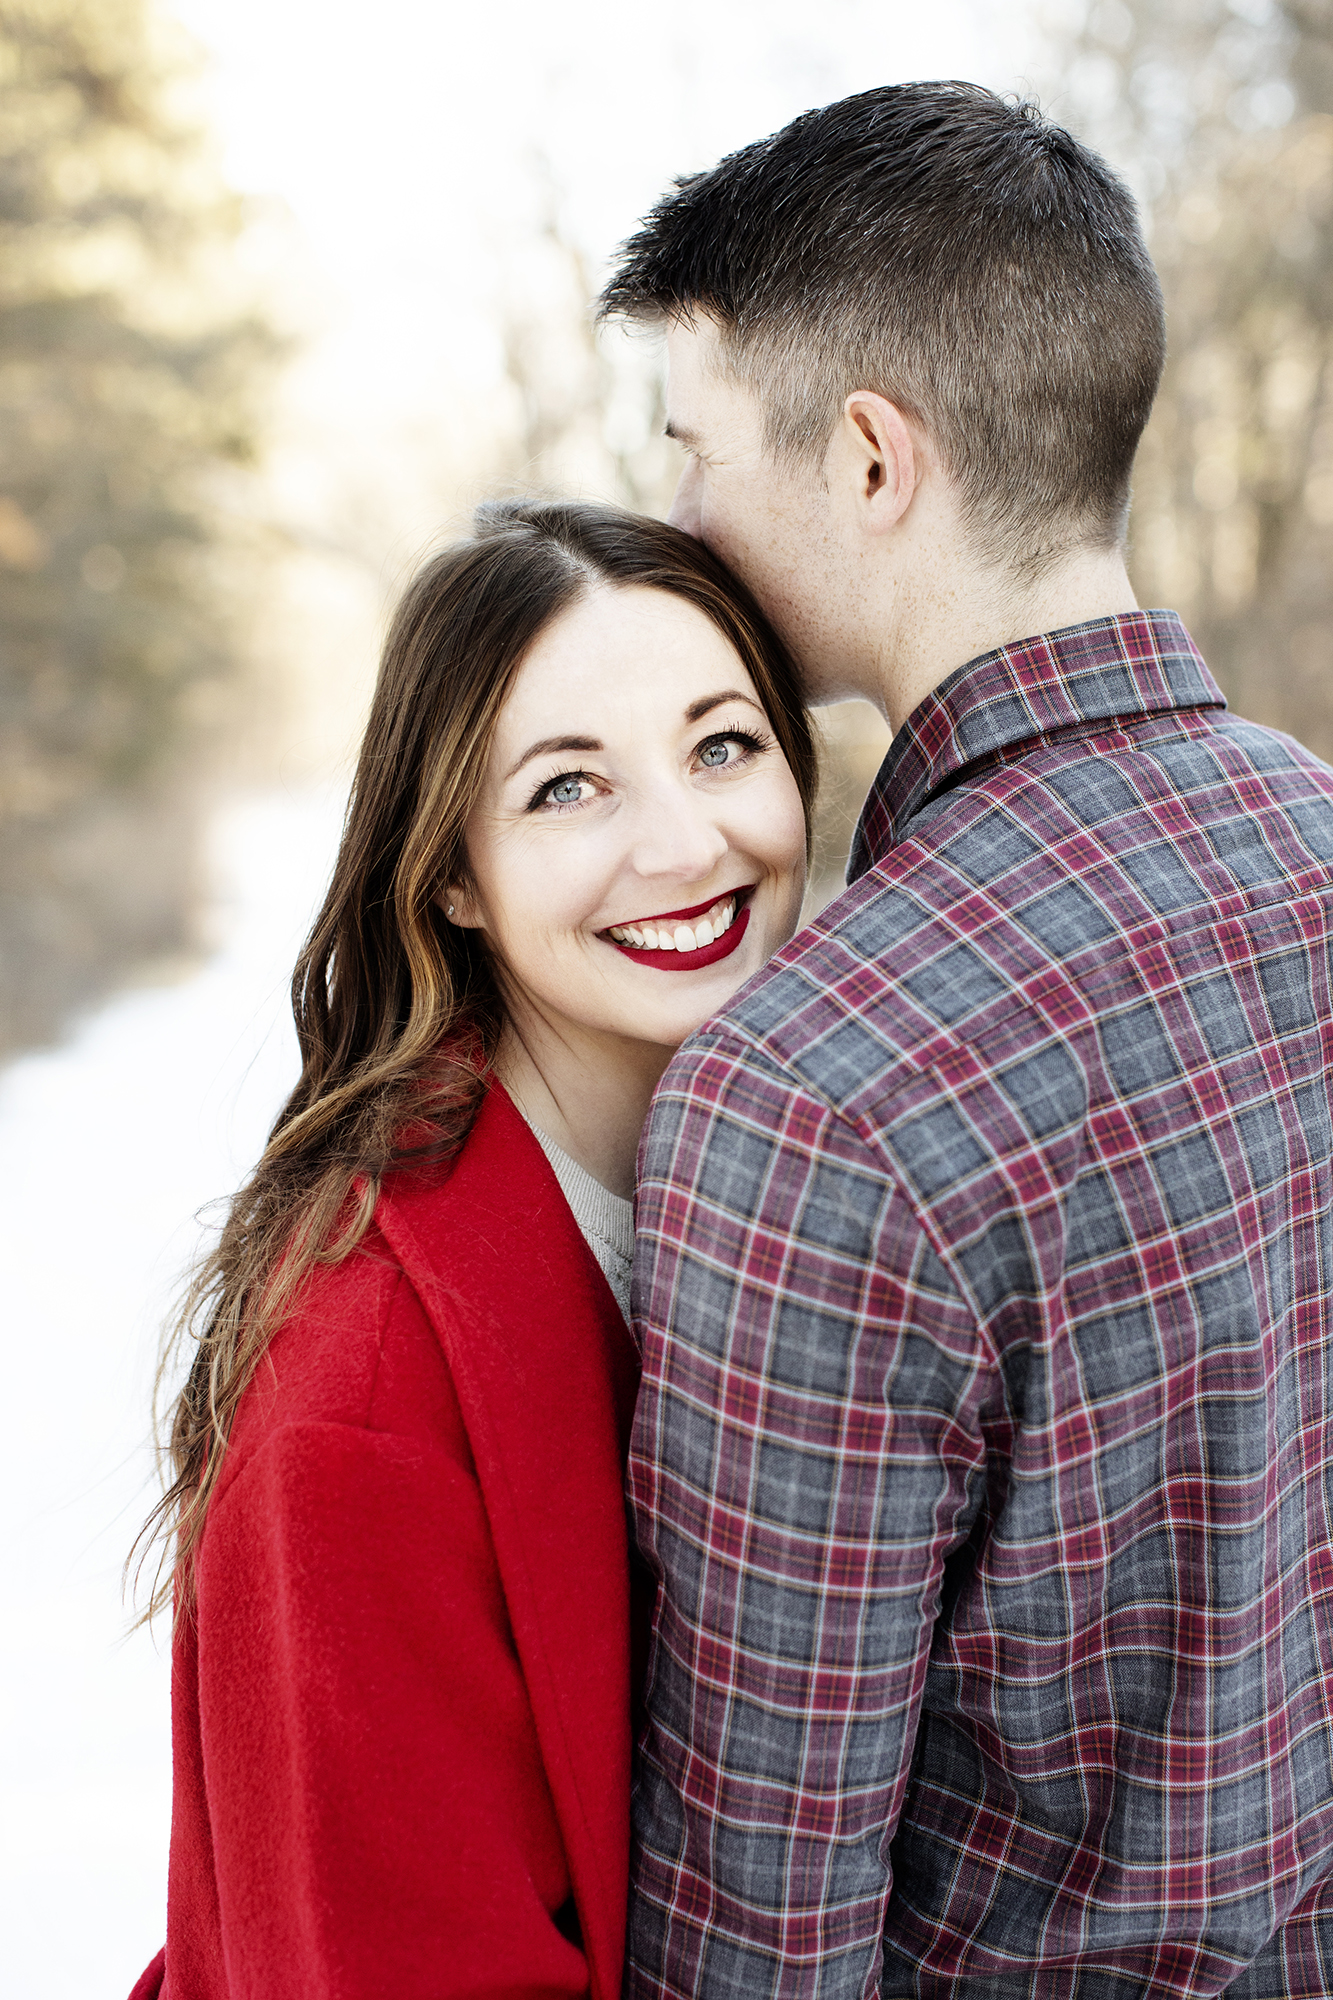 Winter Engagement Session | Afton State Park, MN | Photography by Photogen Inc. | Eliesa Johnson | Based in Minneapolis, Minnesota